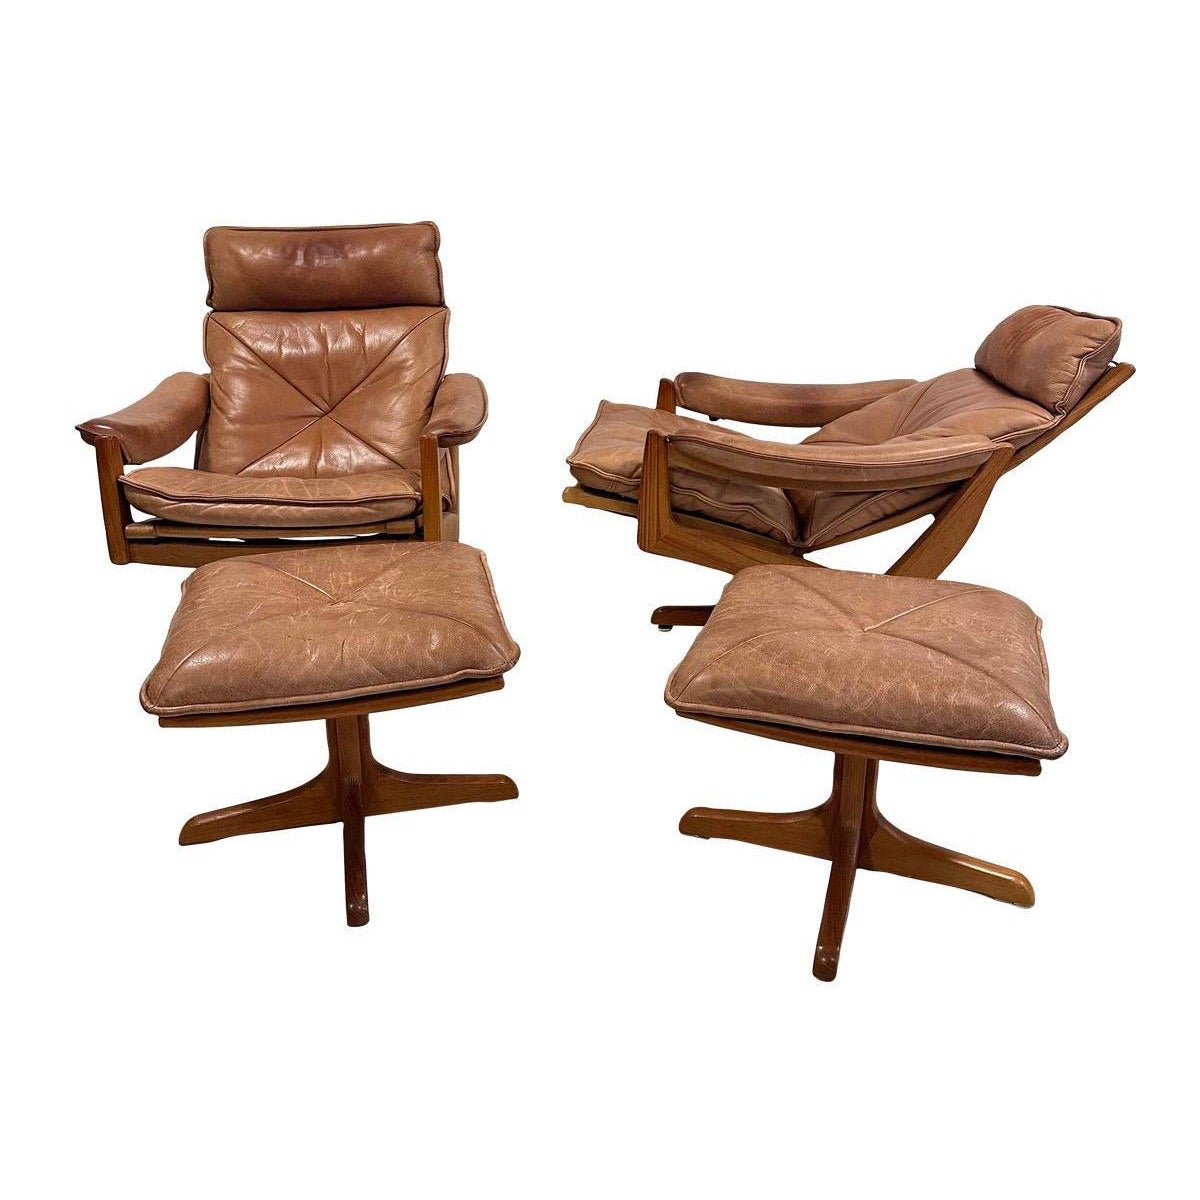 1970s soda galvino Denmark solid teak recliners with ottomans  For Sale